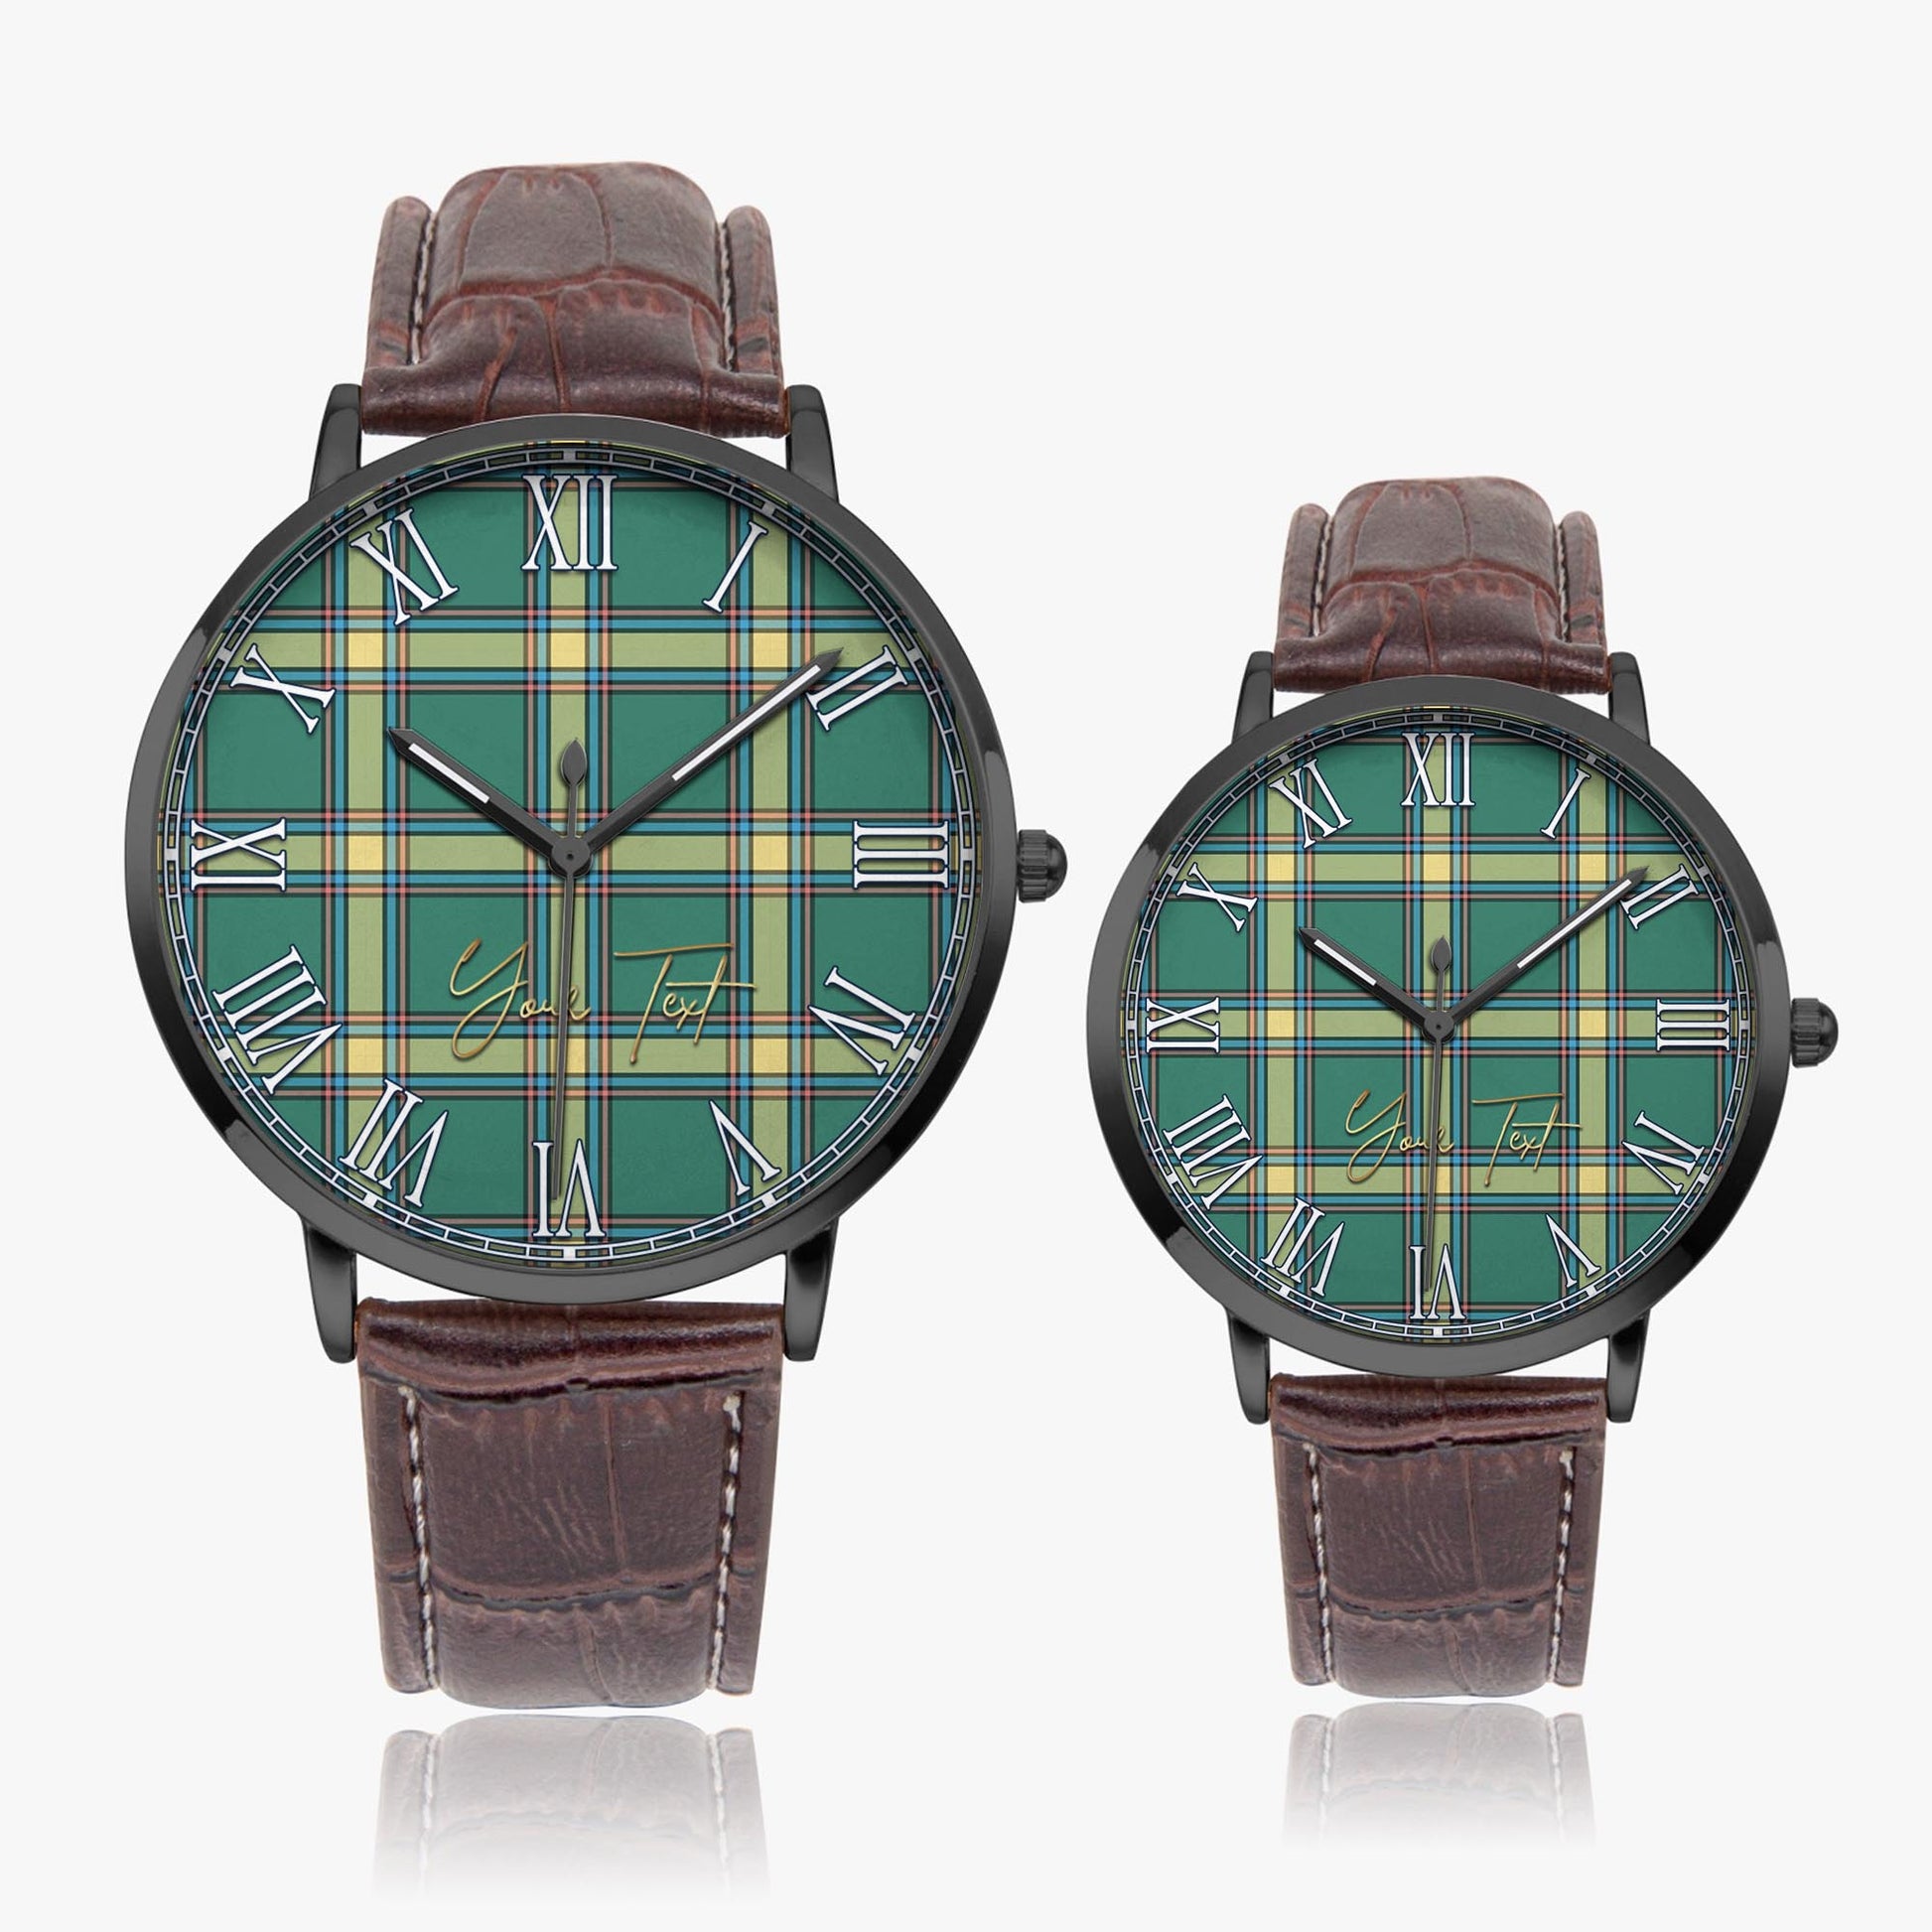 Alberta Province Canada Tartan Personalized Your Text Leather Trap Quartz Watch Ultra Thin Black Case With Brown Leather Strap - Tartanvibesclothing